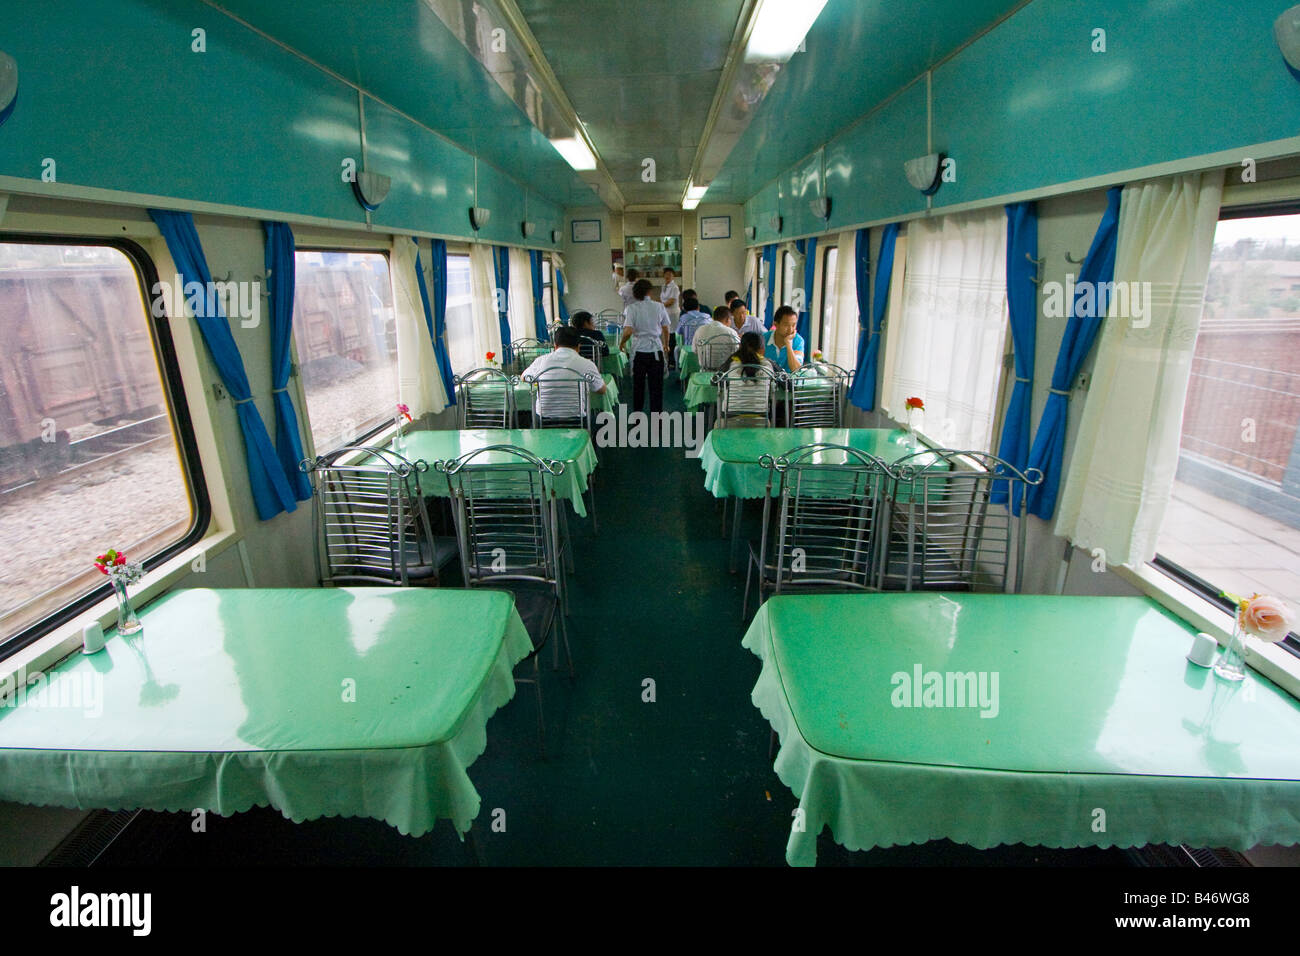 Dining Compartment on a Chinese Train Stock Photo